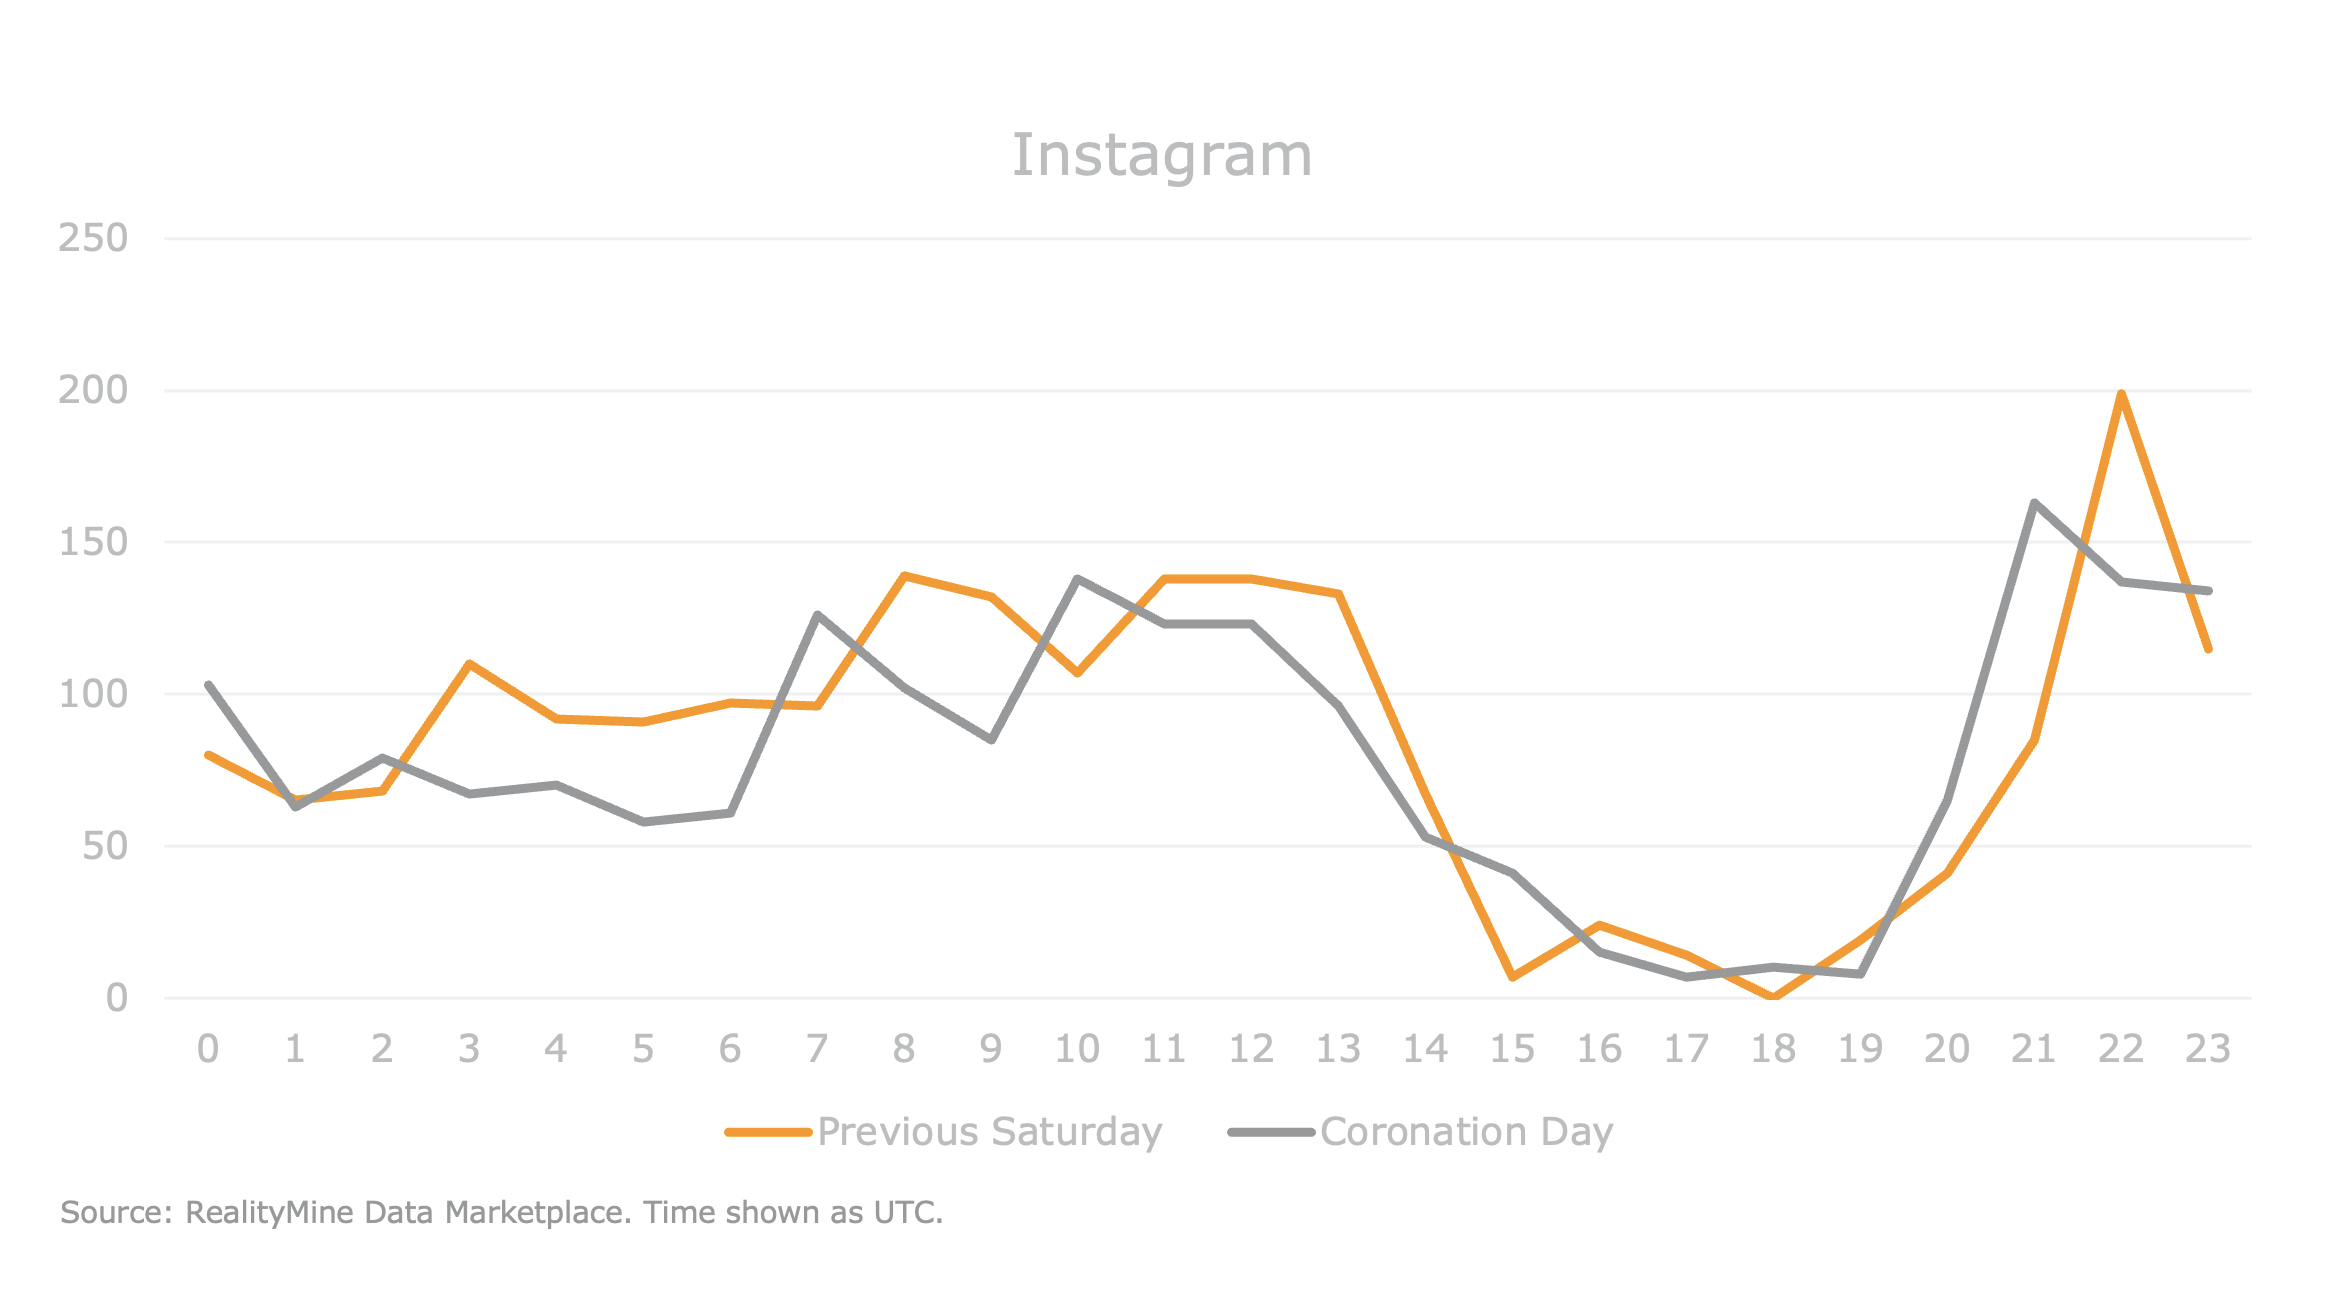 Line chart showing the usage of Instagram app on Coronation Day versus the previous Saturday. Both lines show a similar pattern of usage without huge differences.